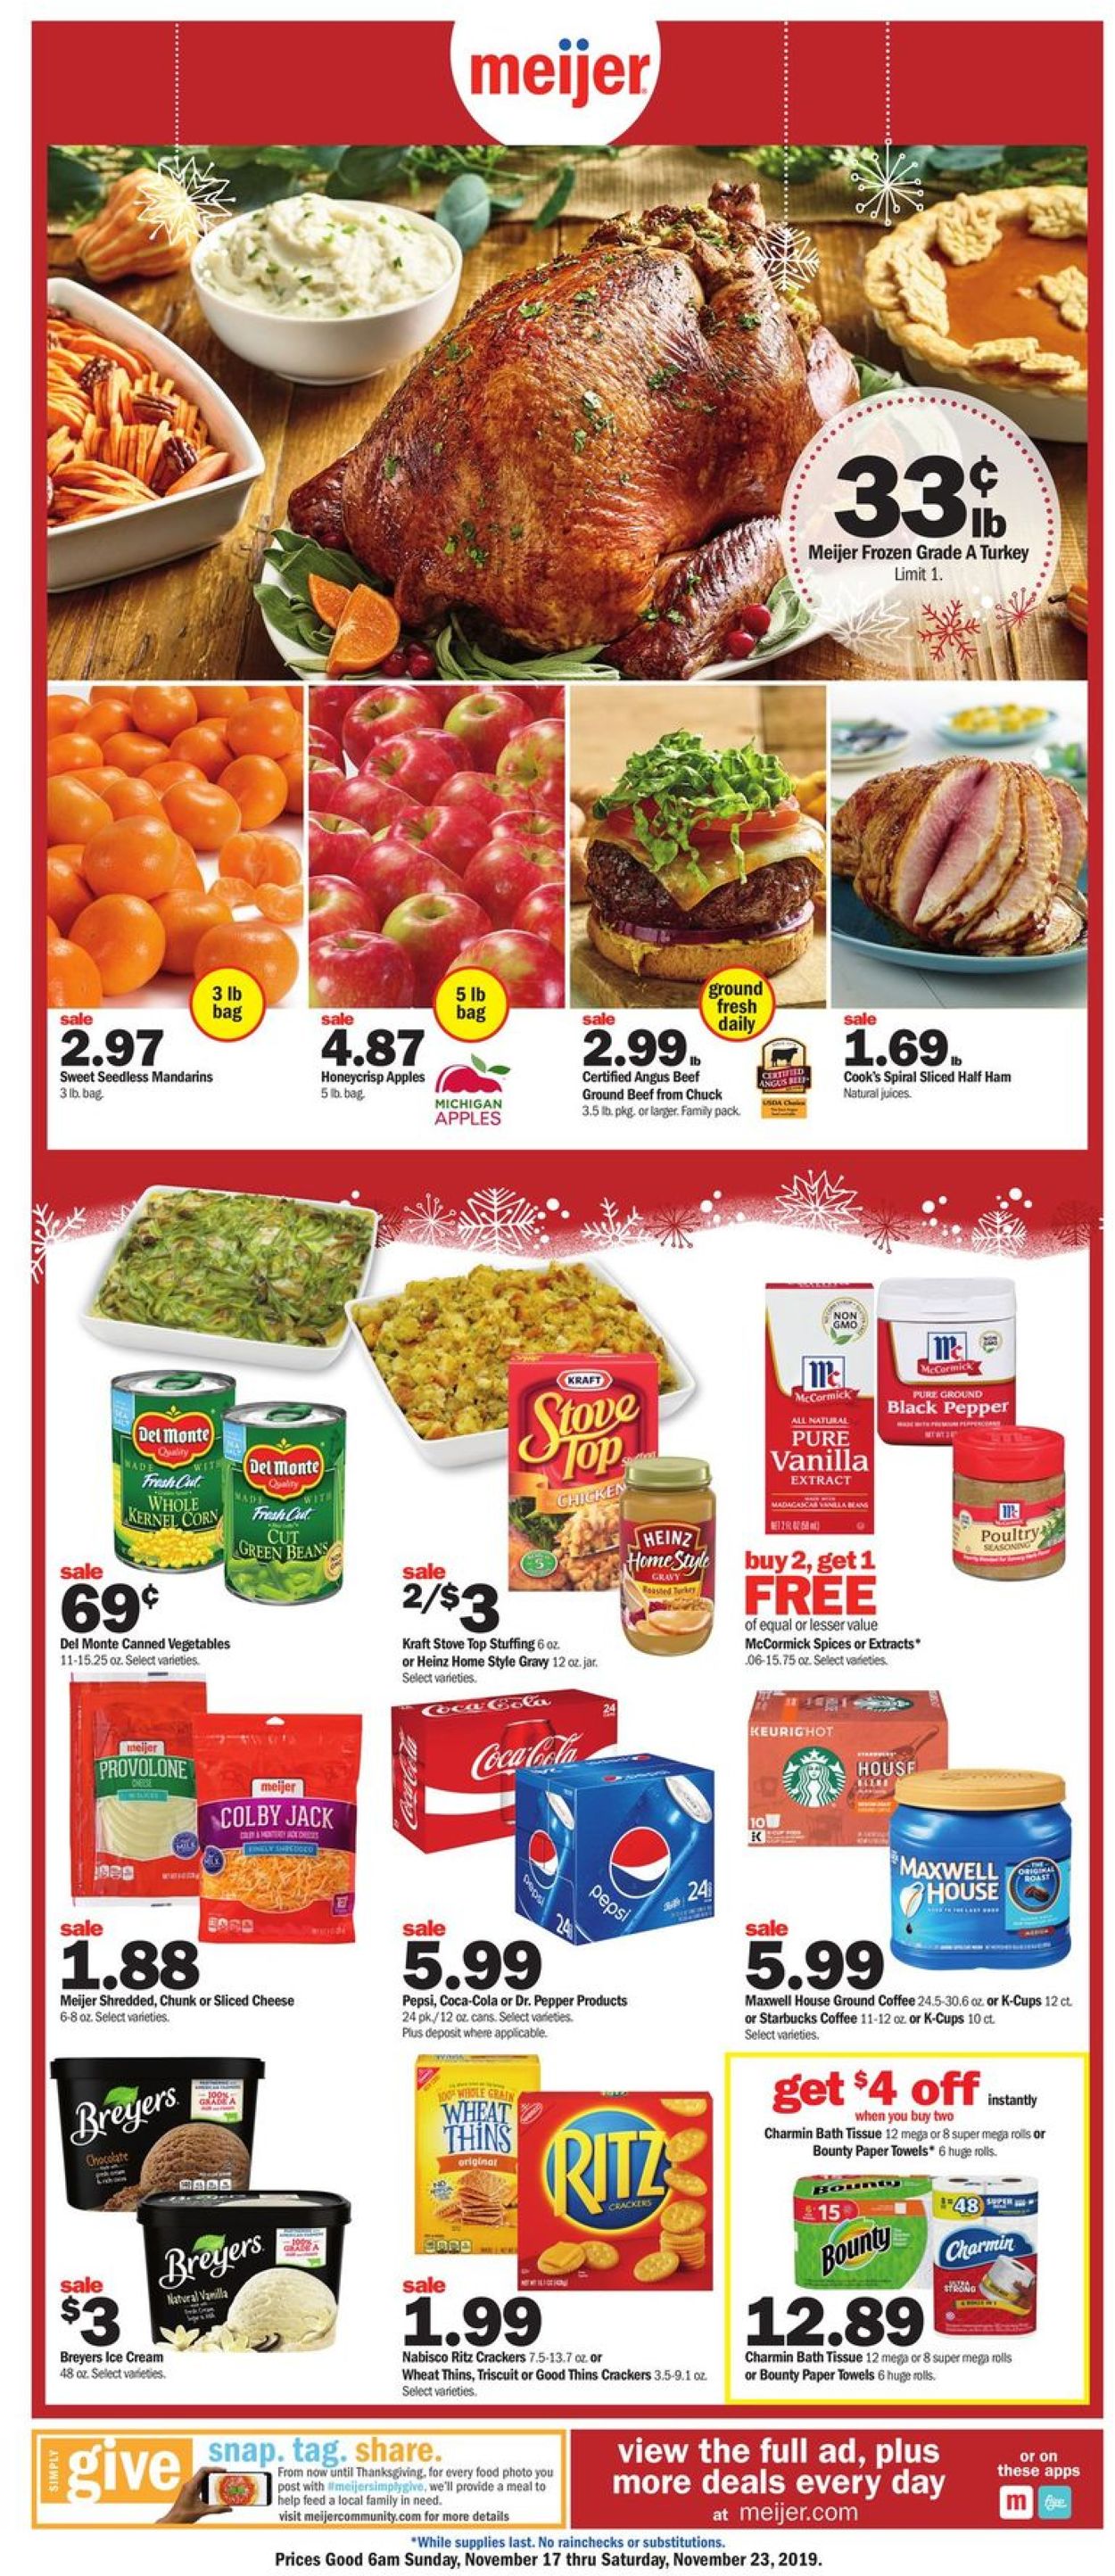 Meijer Current weekly ad 11/17 11/23/2019